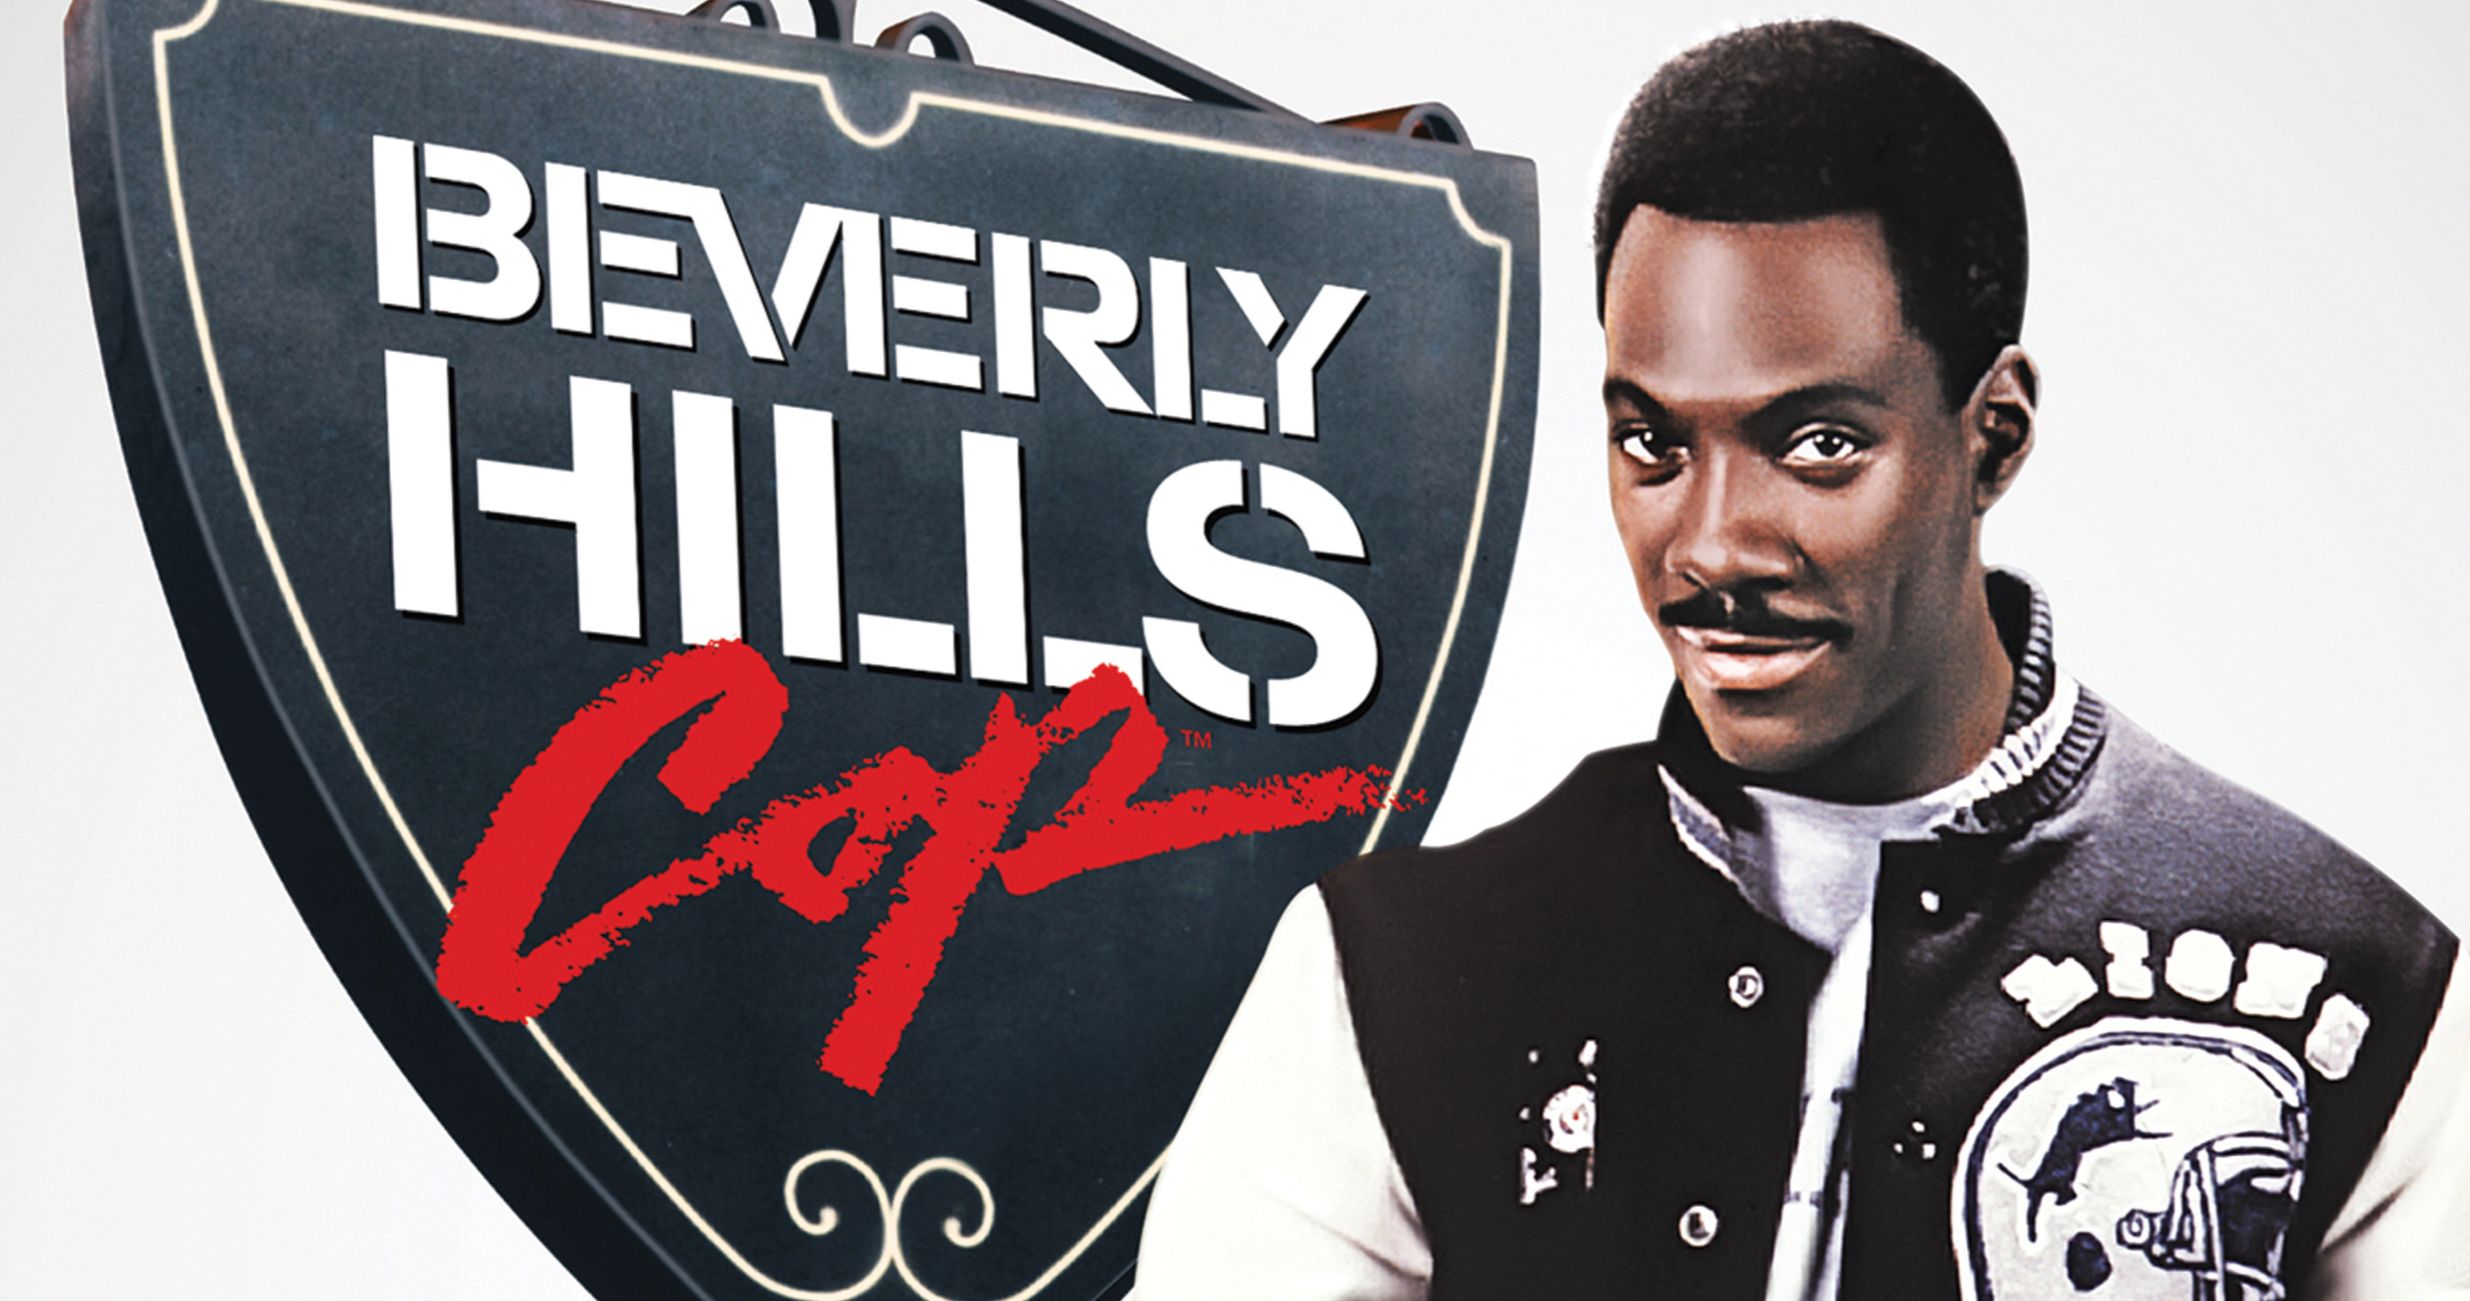 Beverly Hills Cop Trilogy Gets Remastered 4K Release with Never-Before-Seen Deleted Scenes